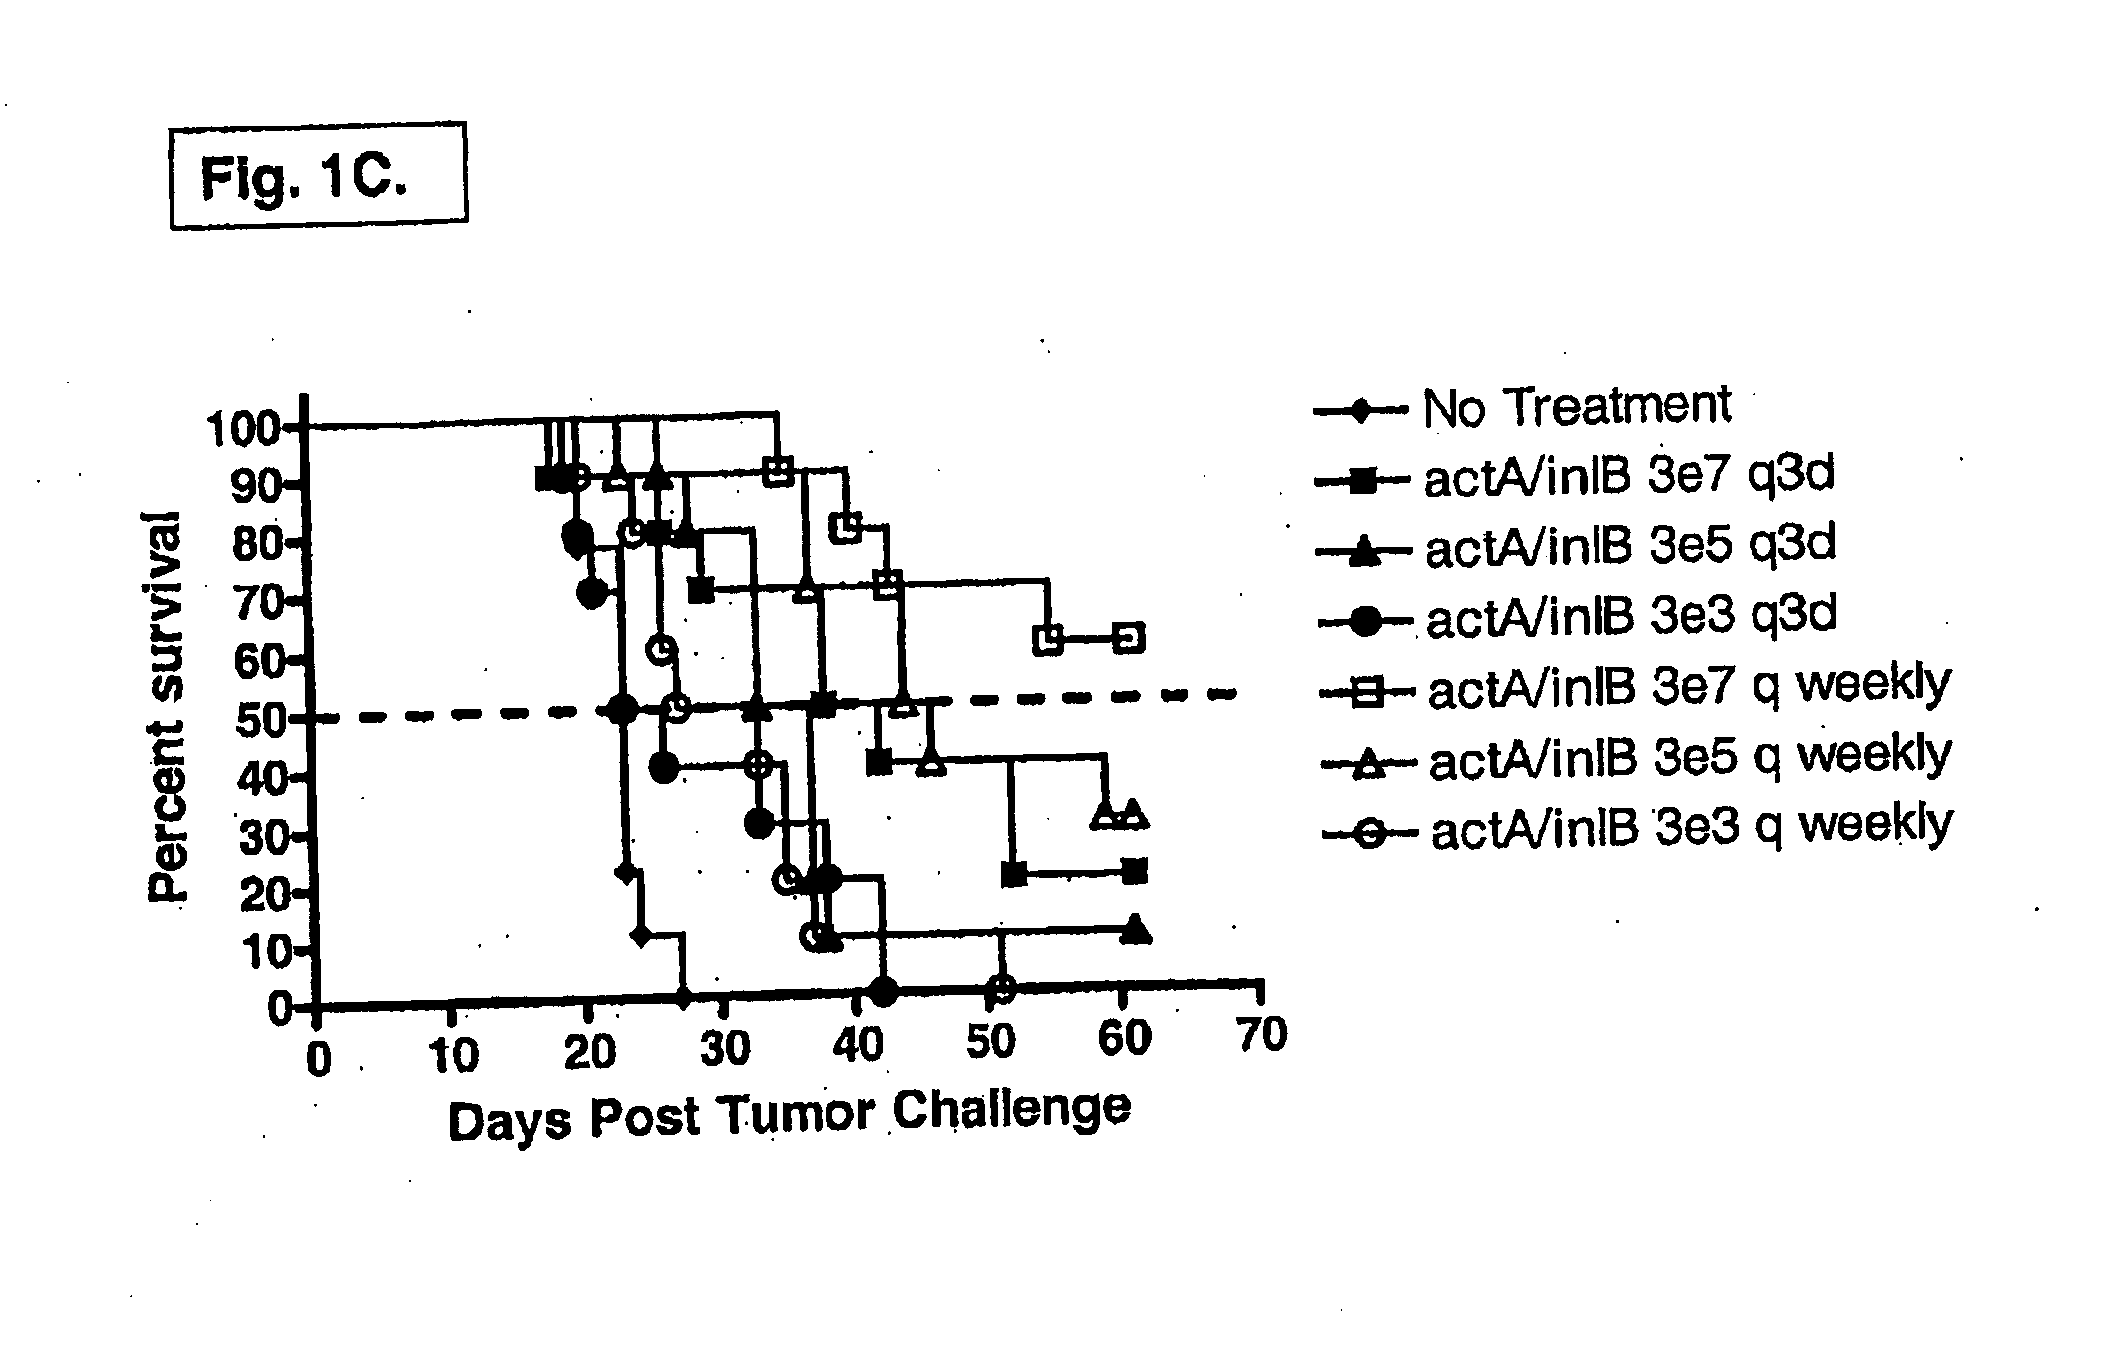 Listeria-induced immunorecruitment and activation, and methods of use thereof